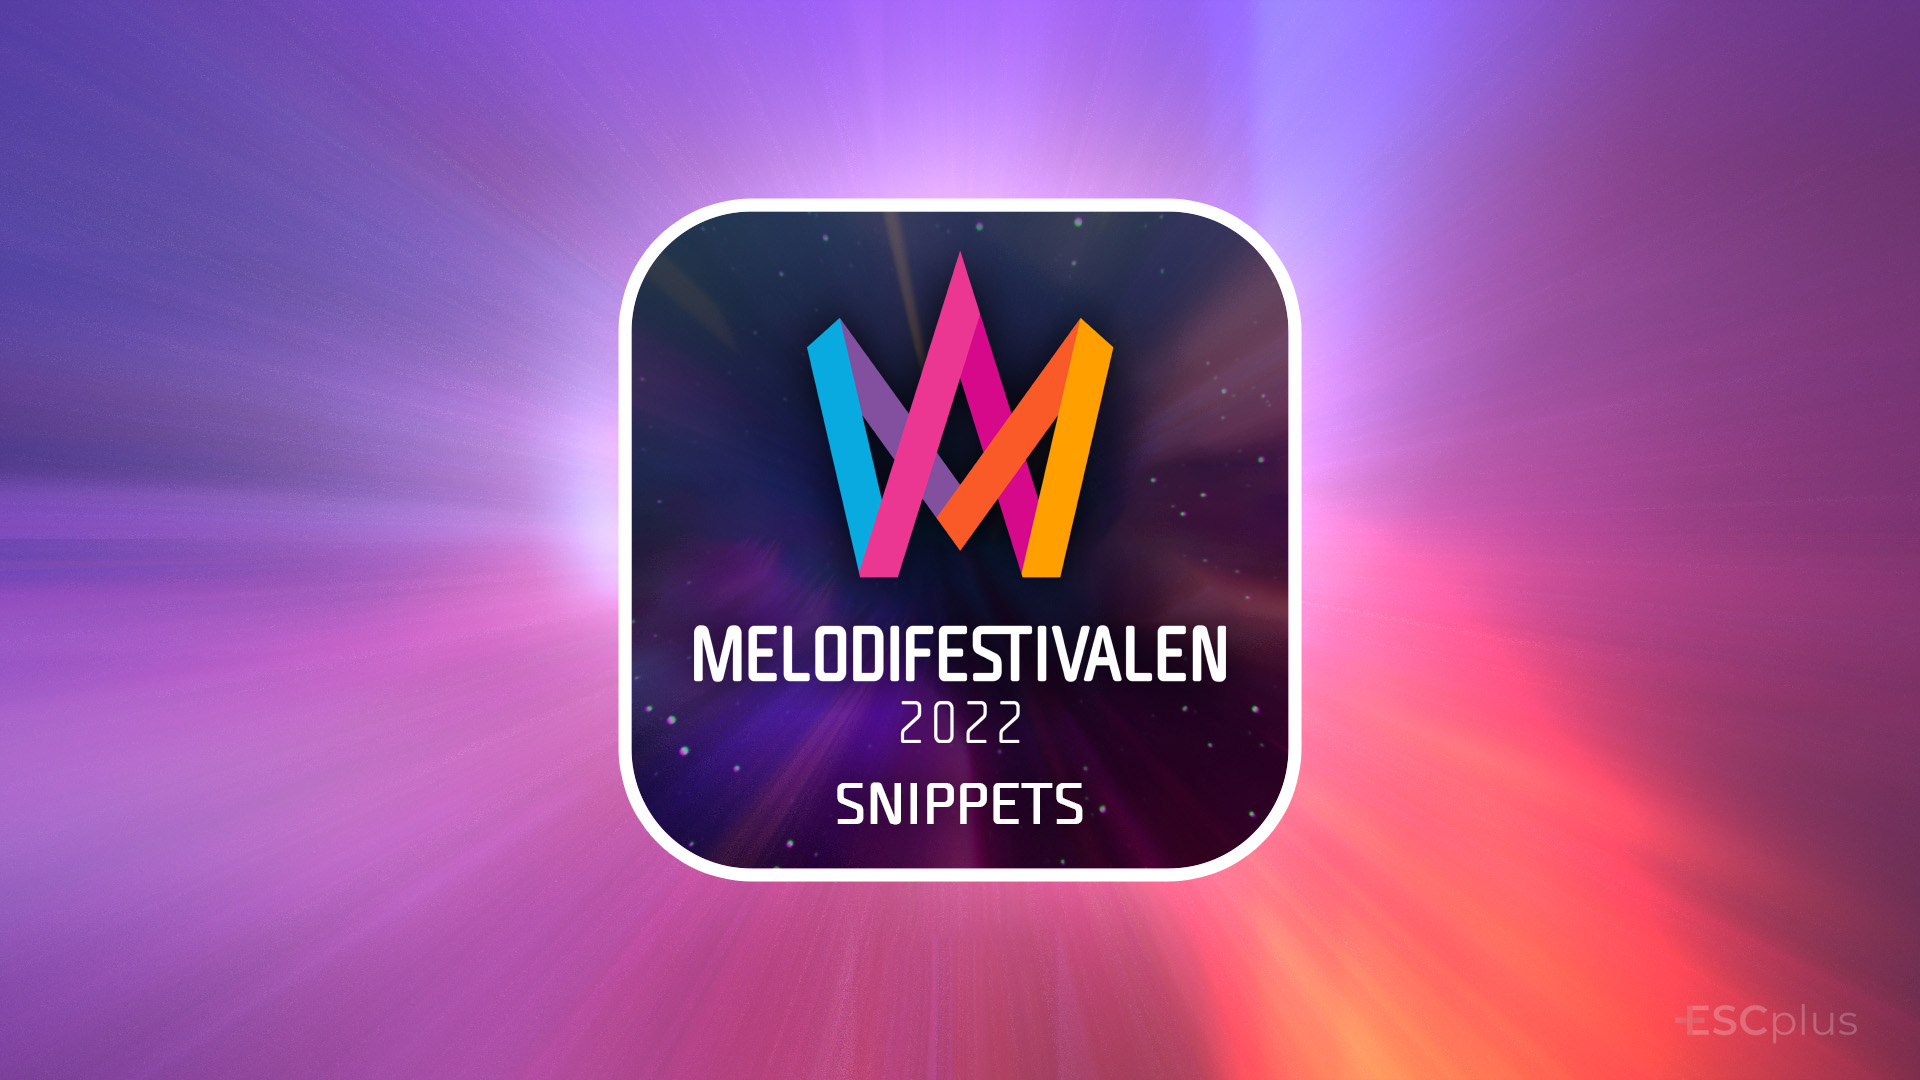 Sweden: The snippets of the fourth Melodifestivalen heat songs are out!